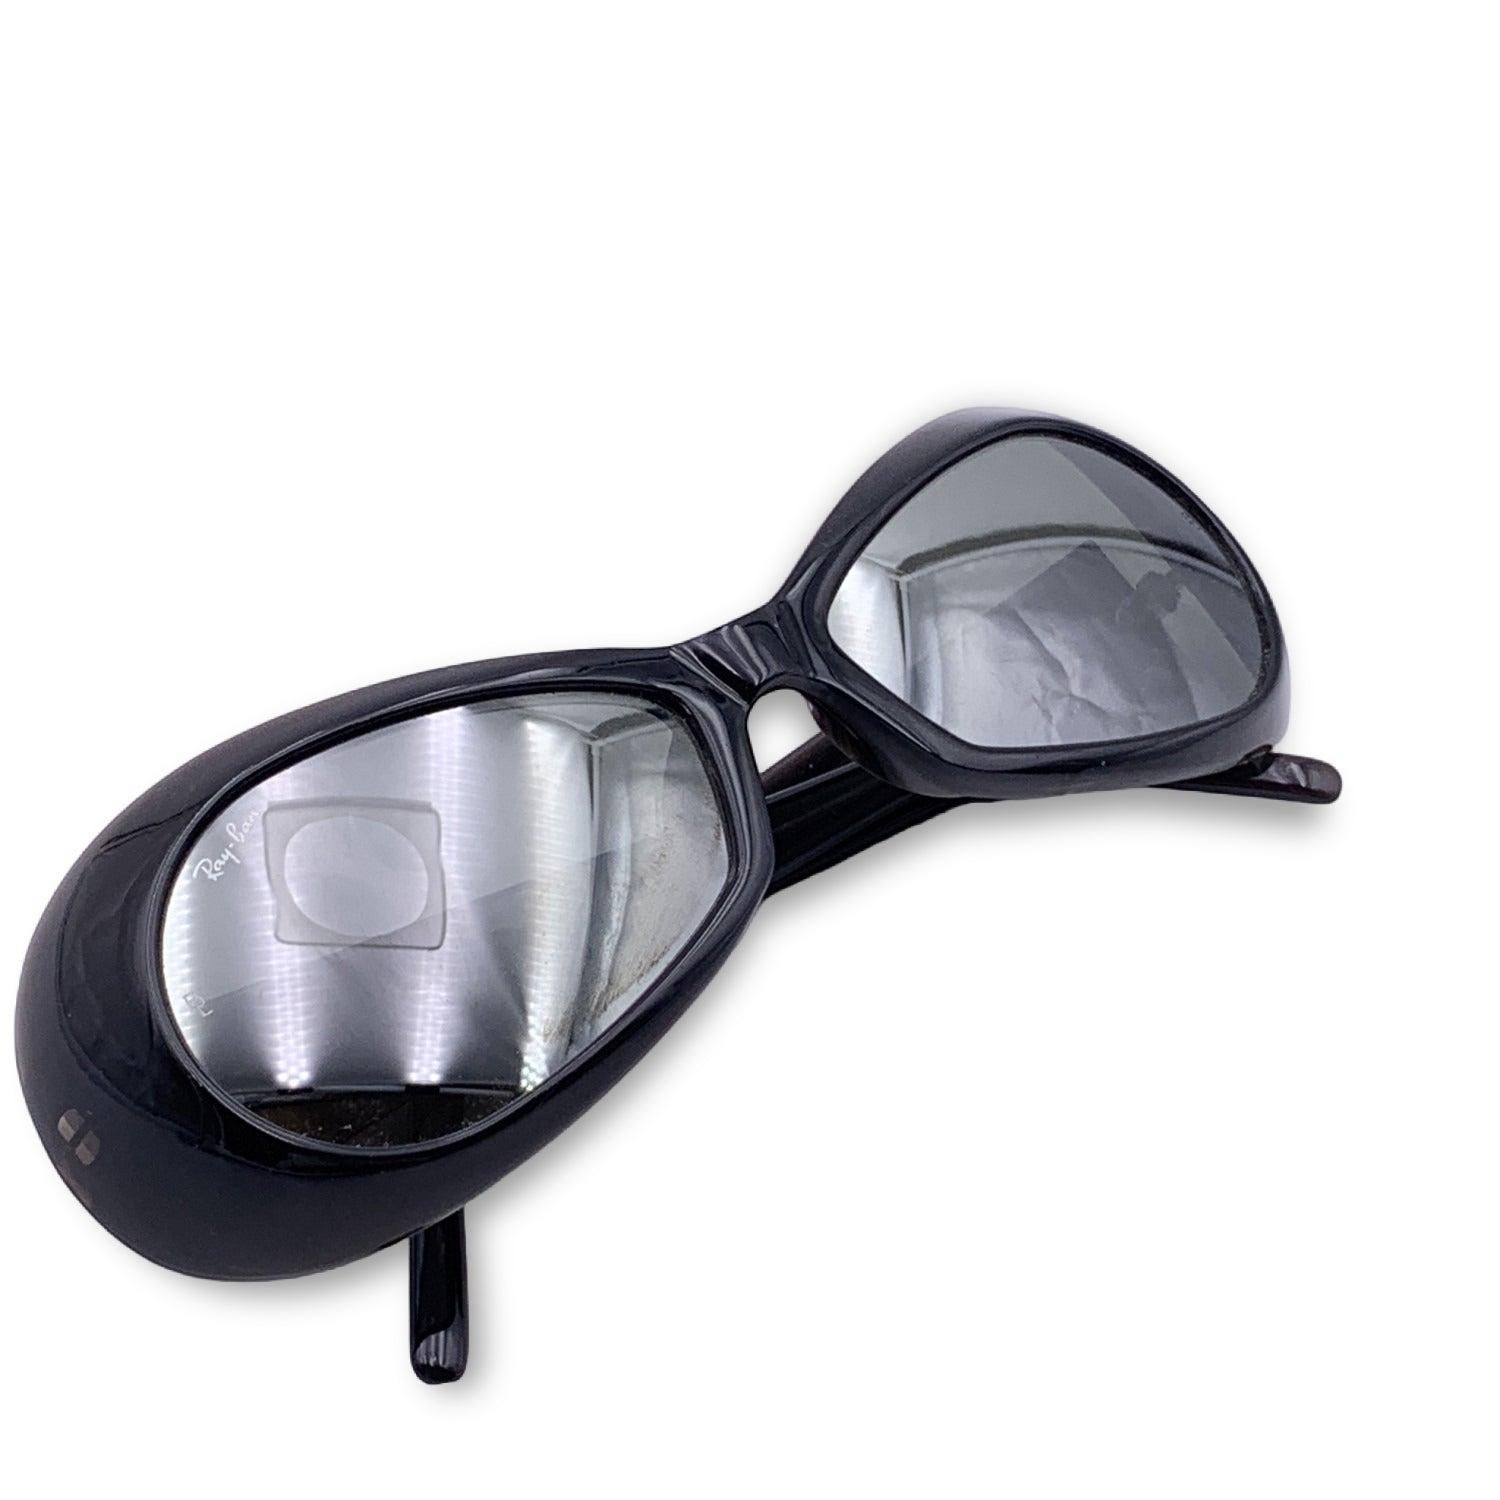 Vintage sunglasses by Ray-Ban Bausch & Lomb, mod. W2635 from the 90s. Black acetate frame. Butterfly design. Mirrored lenses, with BL etched on both corners. Made in USA Details MATERIAL: Acetate COLOR: Black MODEL: W2635 GENDER: Unisex Adults